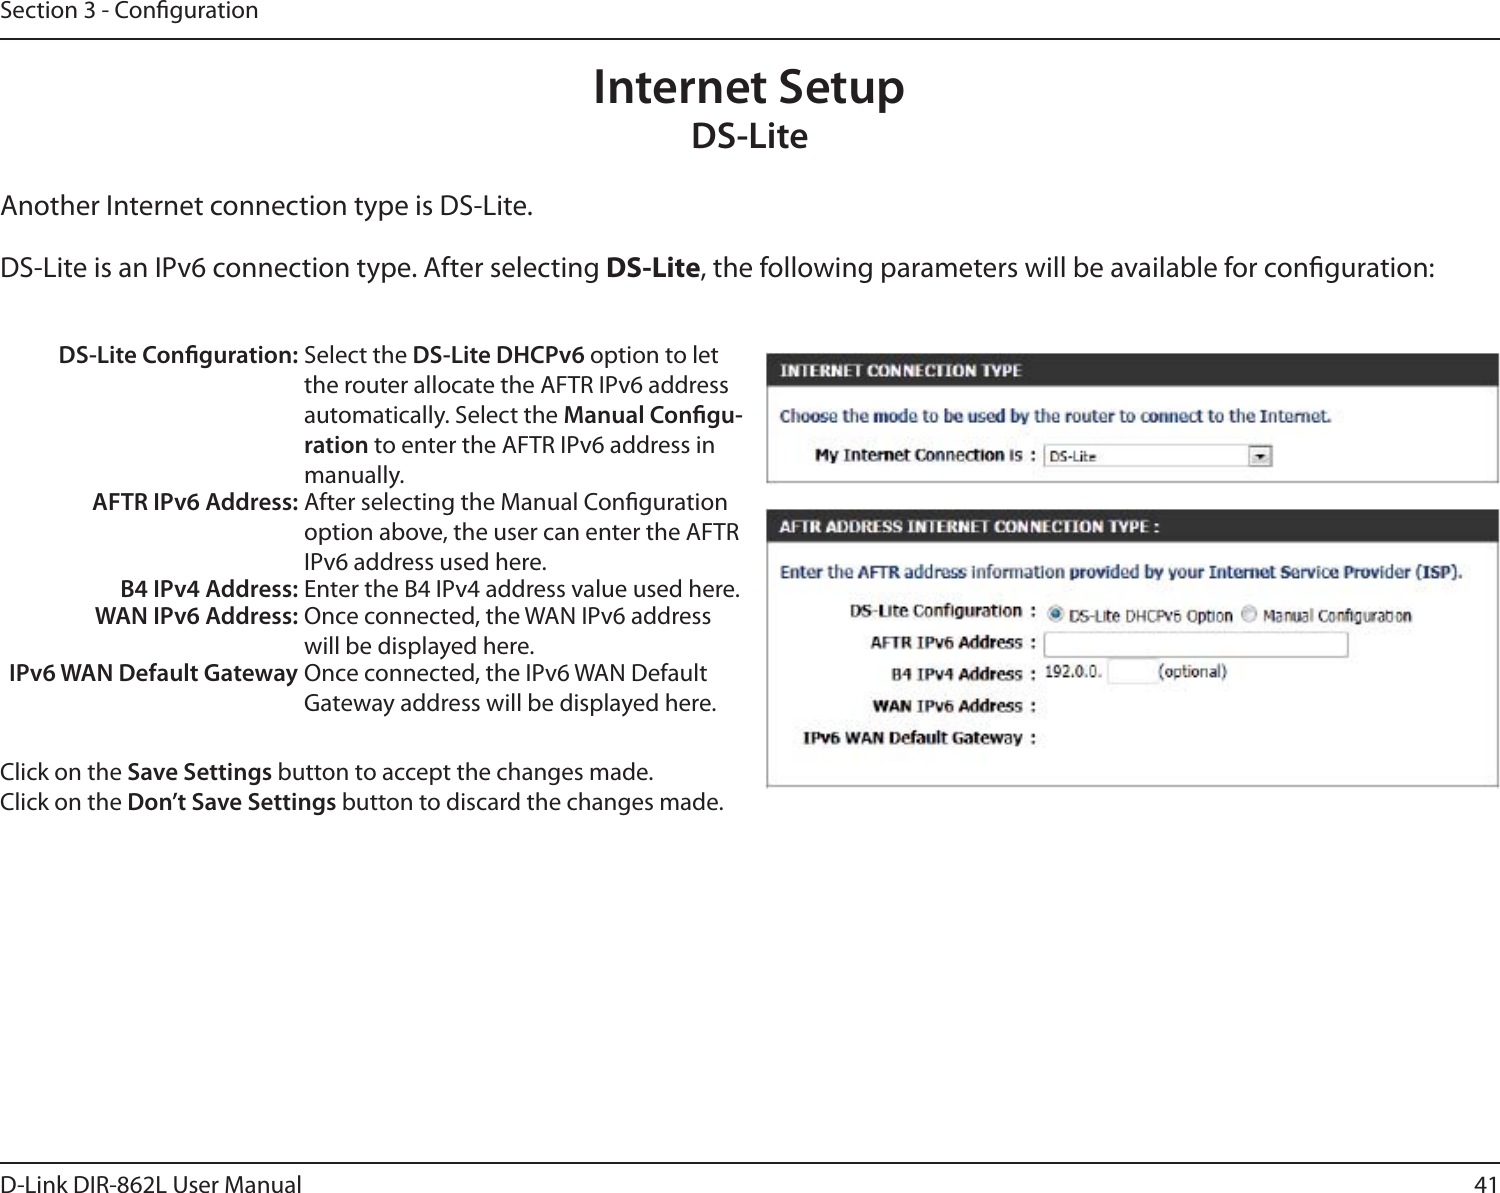 41D-Link DIR-862L User ManualSection 3 - CongurationInternet SetupDS-LiteAnother Internet connection type is DS-Lite.DS-Lite is an IPv6 connection type. After selecting DS-Lite, the following parameters will be available for conguration:DS-Lite Conguration: Select the DS-Lite DHCPv6 option to let the router allocate the AFTR IPv6 address automatically. Select the Manual Congu-ration to enter the AFTR IPv6 address in manually.AFTR IPv6 Address: After selecting the Manual Conguration option above, the user can enter the AFTR IPv6 address used here.B4 IPv4 Address: Enter the B4 IPv4 address value used here.WAN IPv6 Address: Once connected, the WAN IPv6 address will be displayed here.IPv6 WAN Default Gateway Once connected, the IPv6 WAN Default Gateway address will be displayed here.Click on the Save Settings button to accept the changes made.Click on the Don’t Save Settings button to discard the changes made.